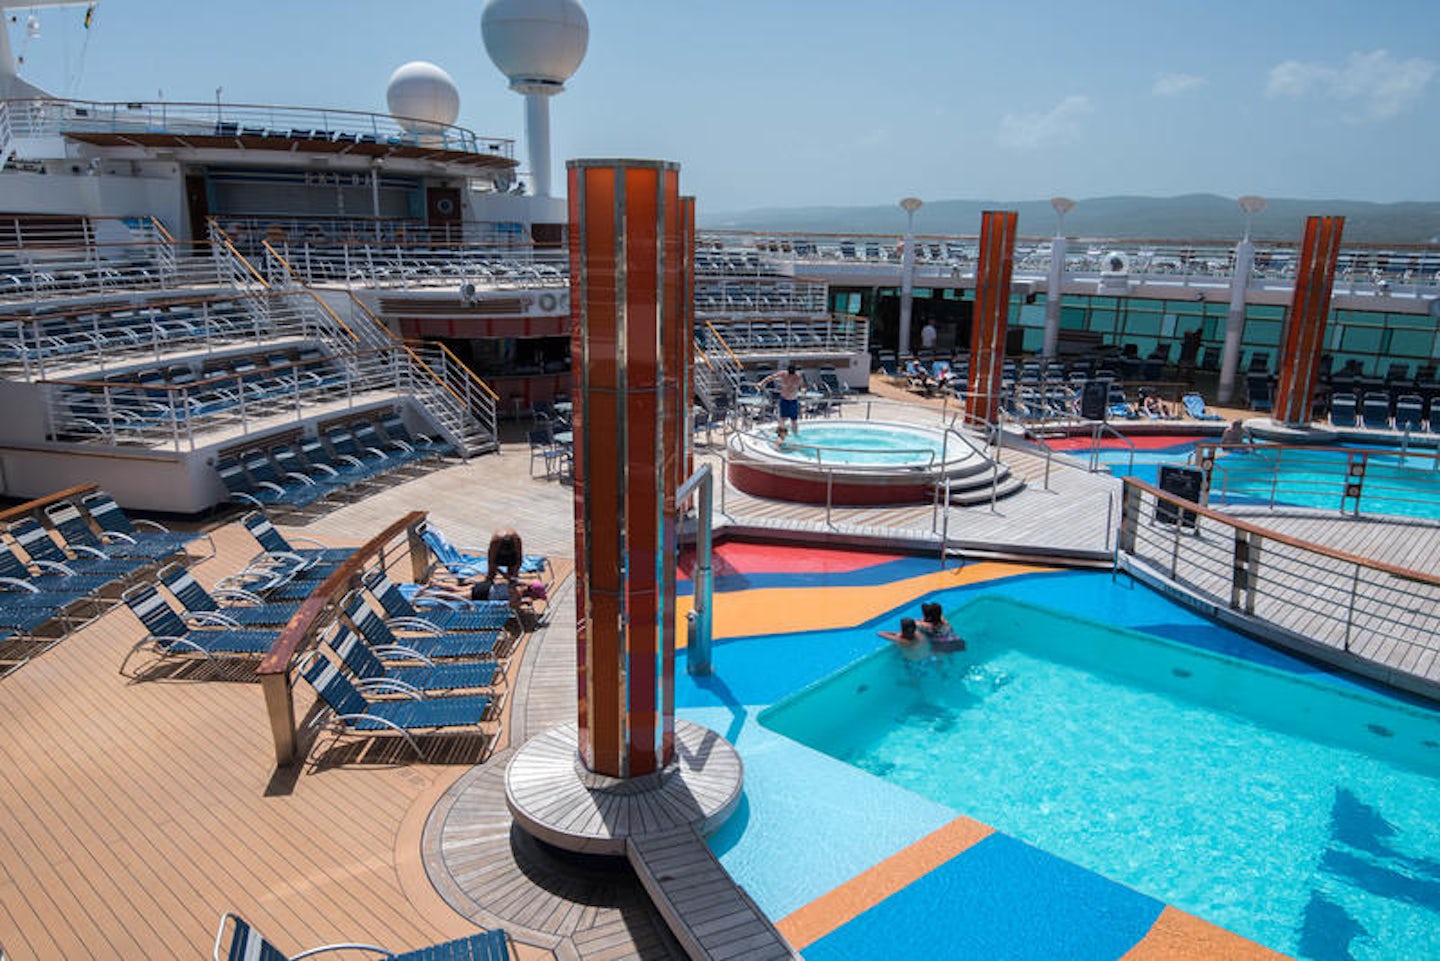 The Main Pool on Freedom of the Seas